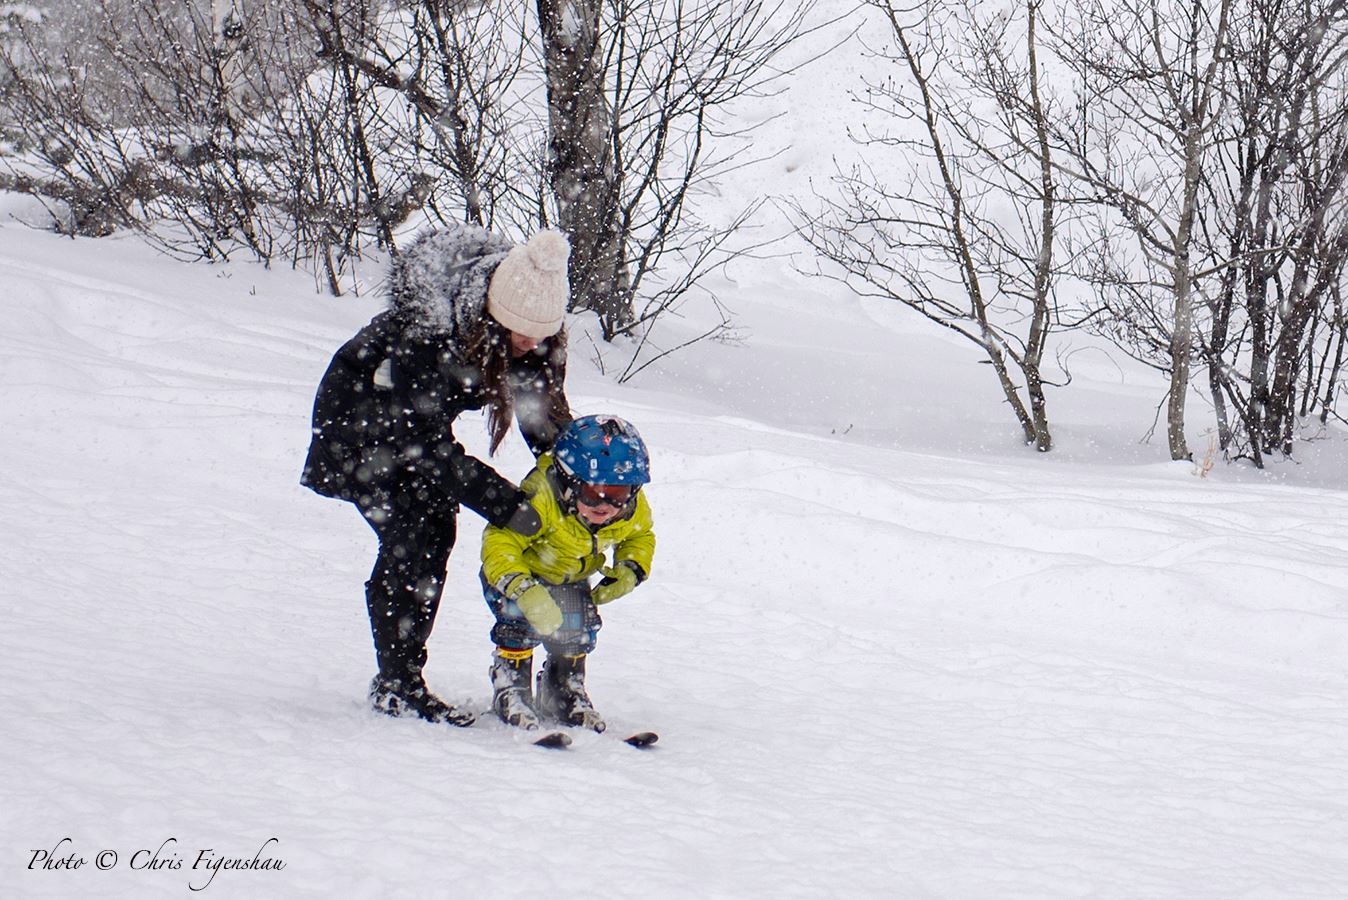 Smiles and Heavy Snow at JH Today. Image: Chris Figenshau